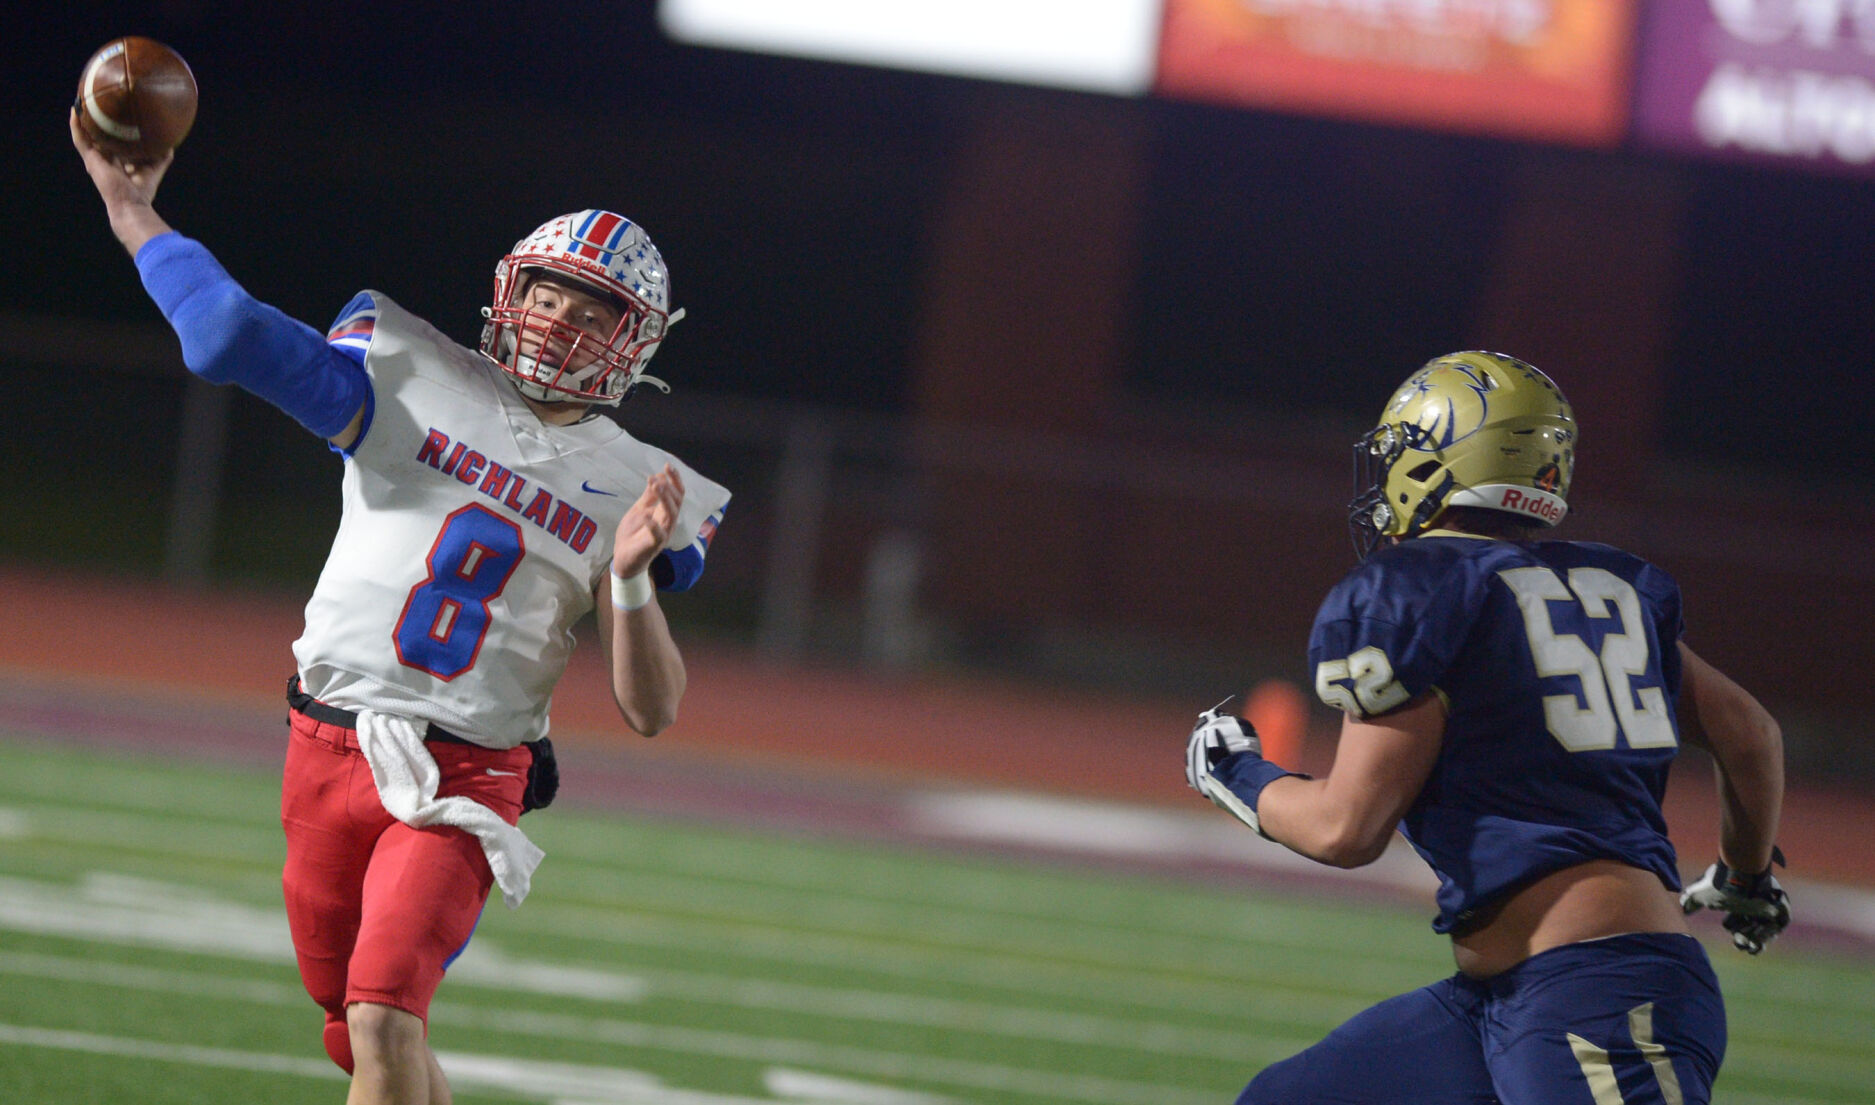 Bald Eagle Area Dominates Richland 49-0 in District 6 Class 2A Championship Game